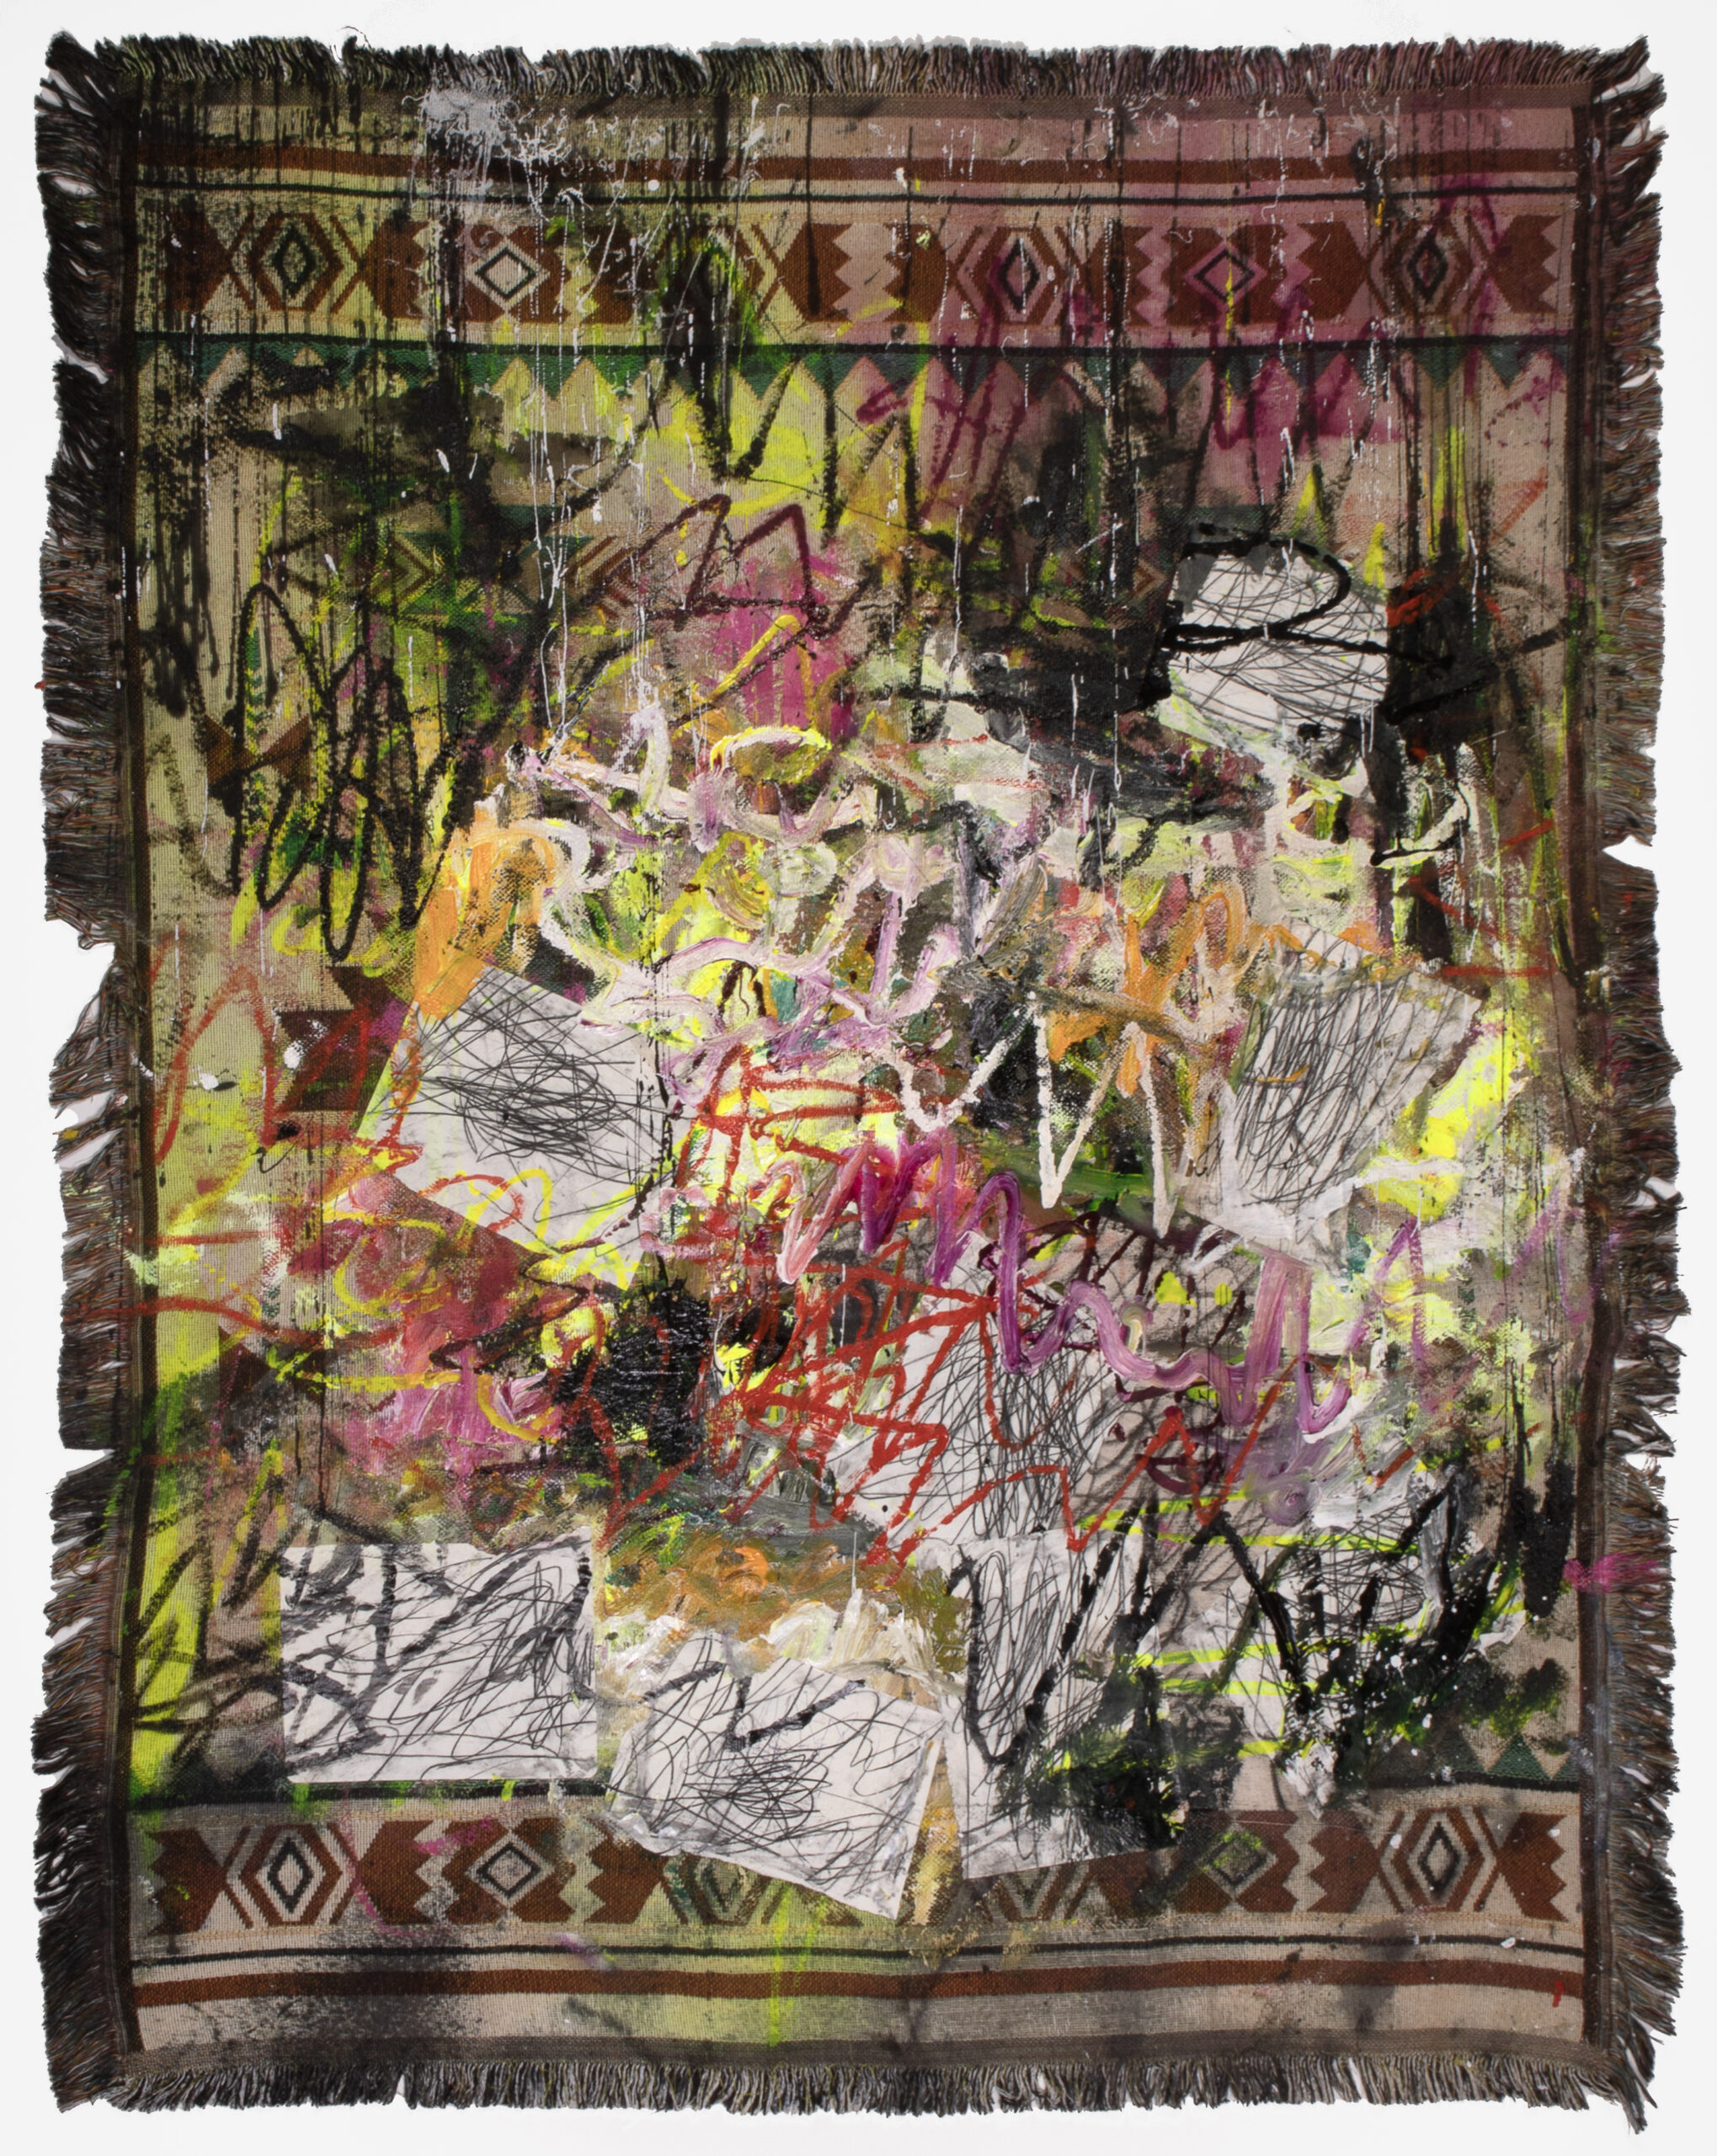 
							

									Patrick Dean Hubbell									When All Is Taken, You Protect Our Spirit 2022									oil, acrylic, enamel, charcoal, paper, polymer, canvas, mass manufactured synthetic textile<br />
66 x 54 inches<br />
sold									


							